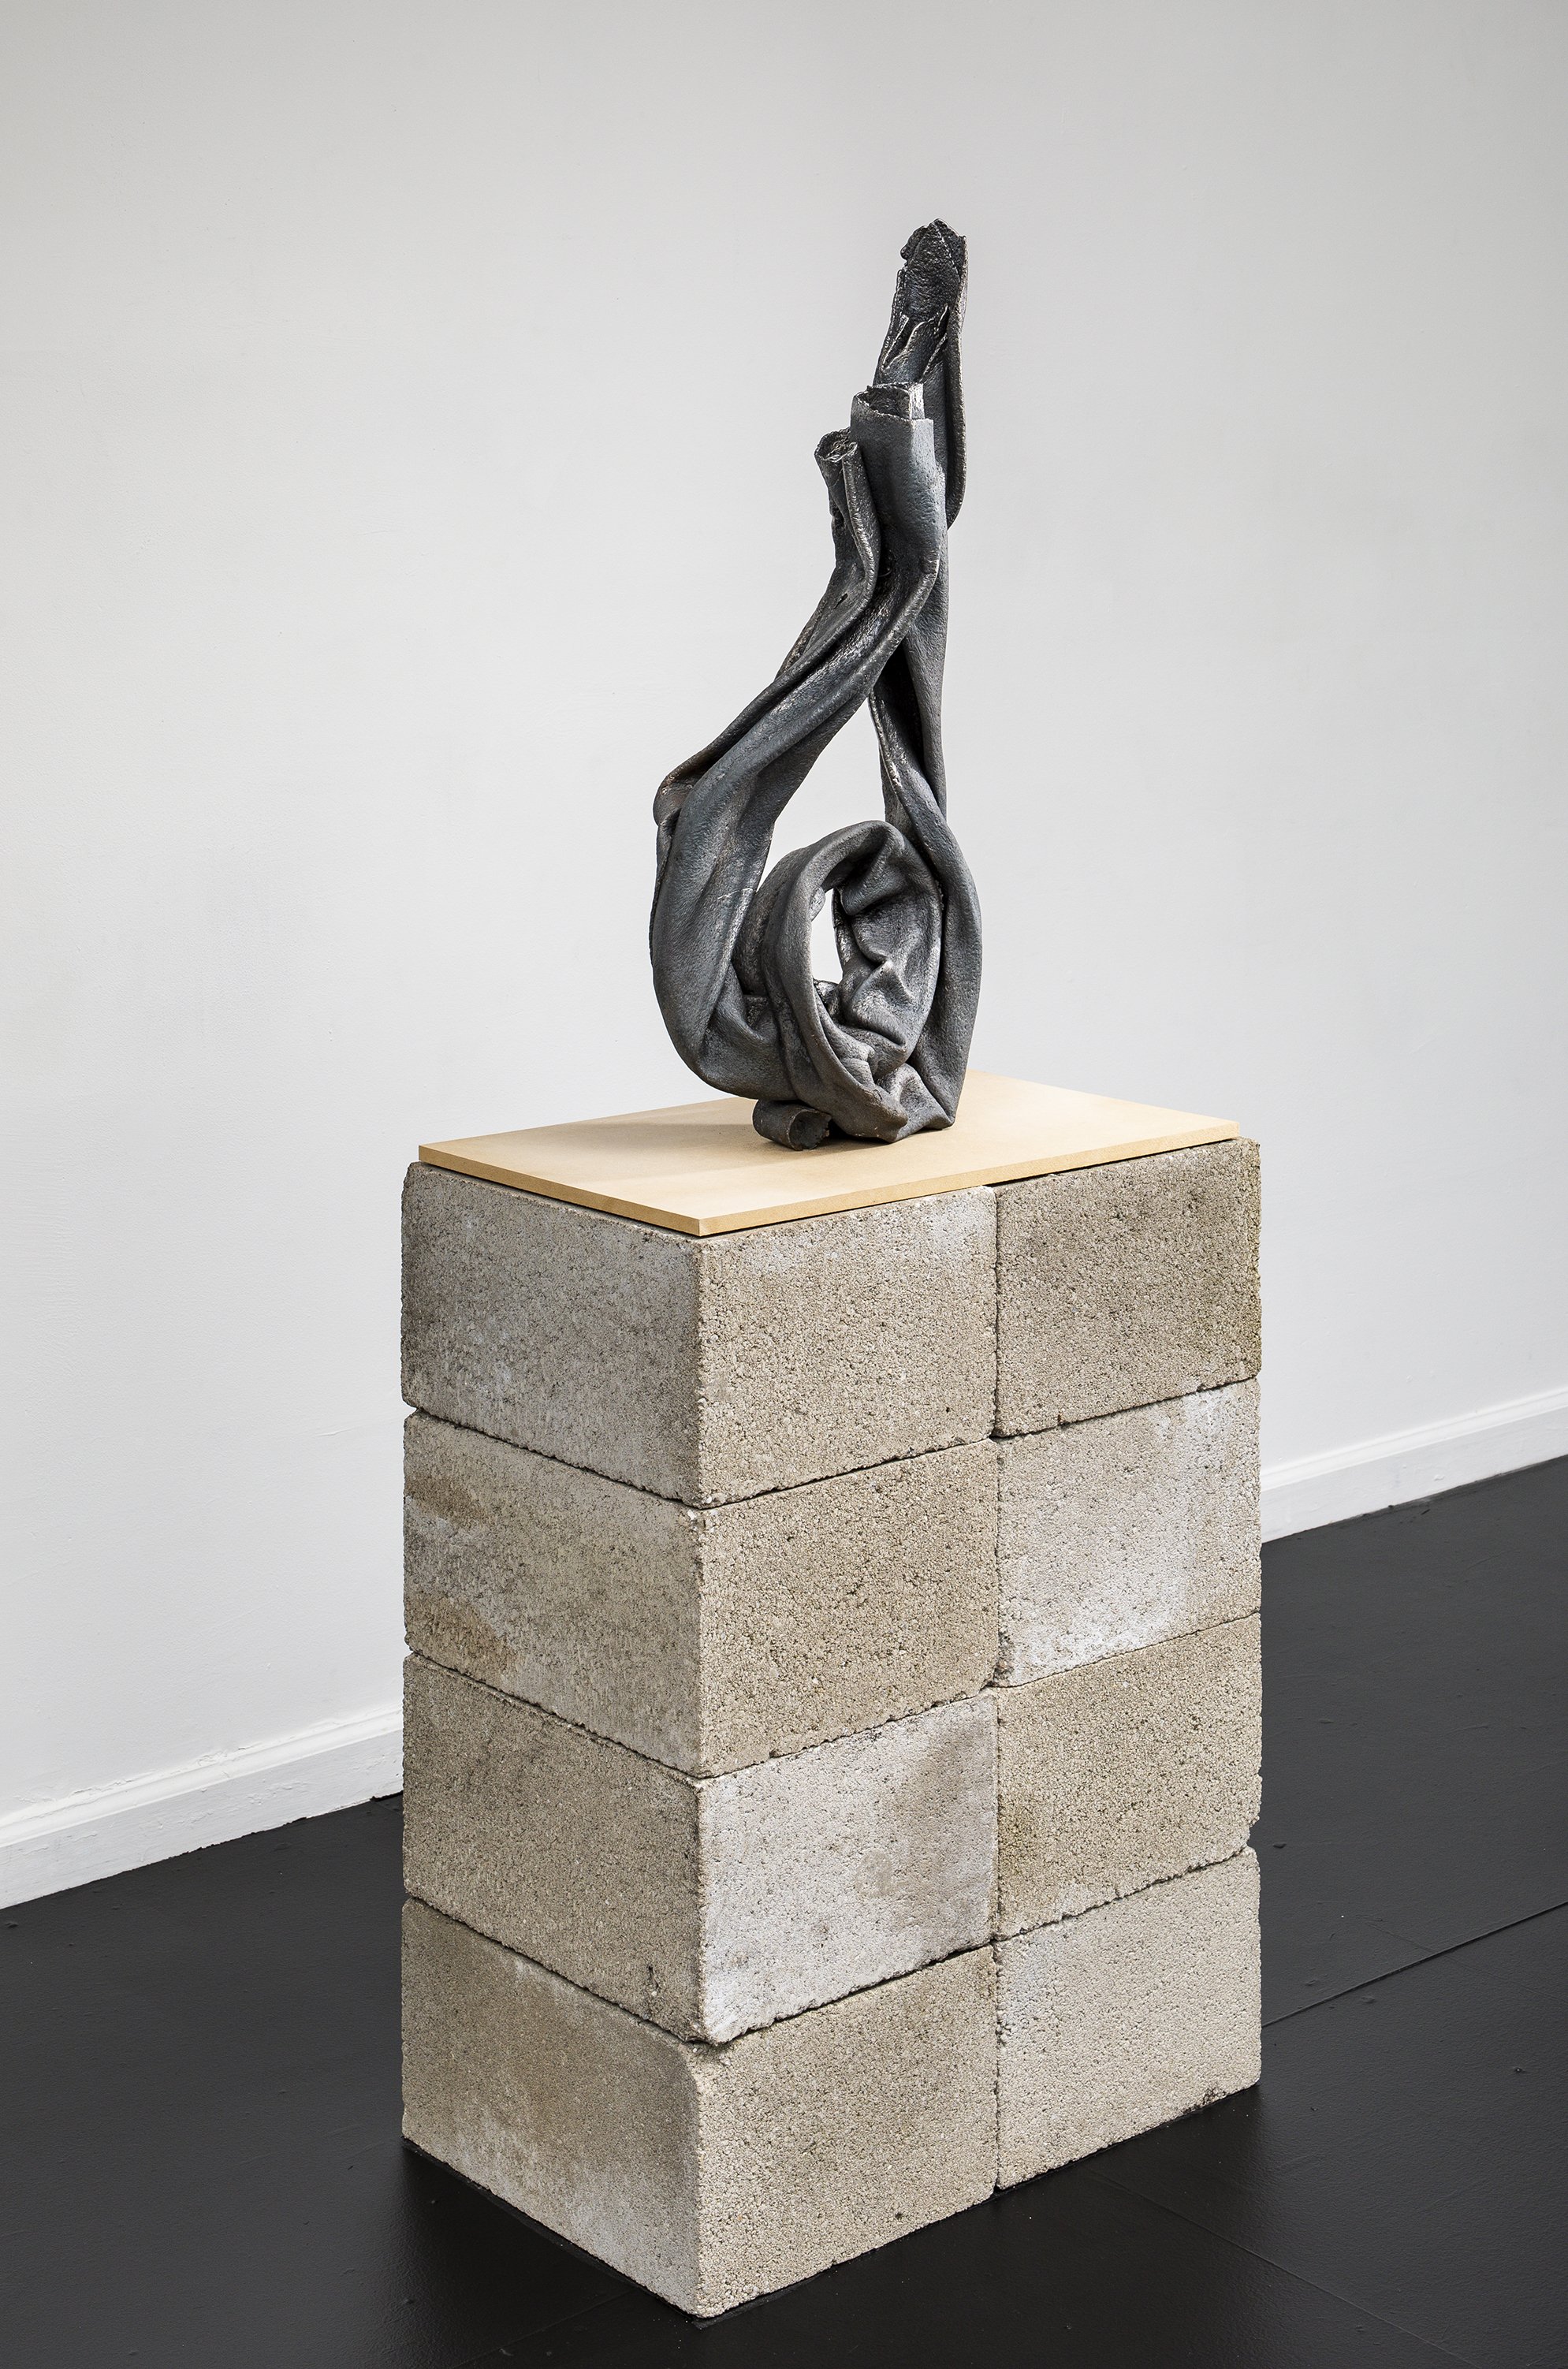  Eli Ping,  Moult , 2022. Cast iron. 29.5 x 12.25 x 6.5 inches. 